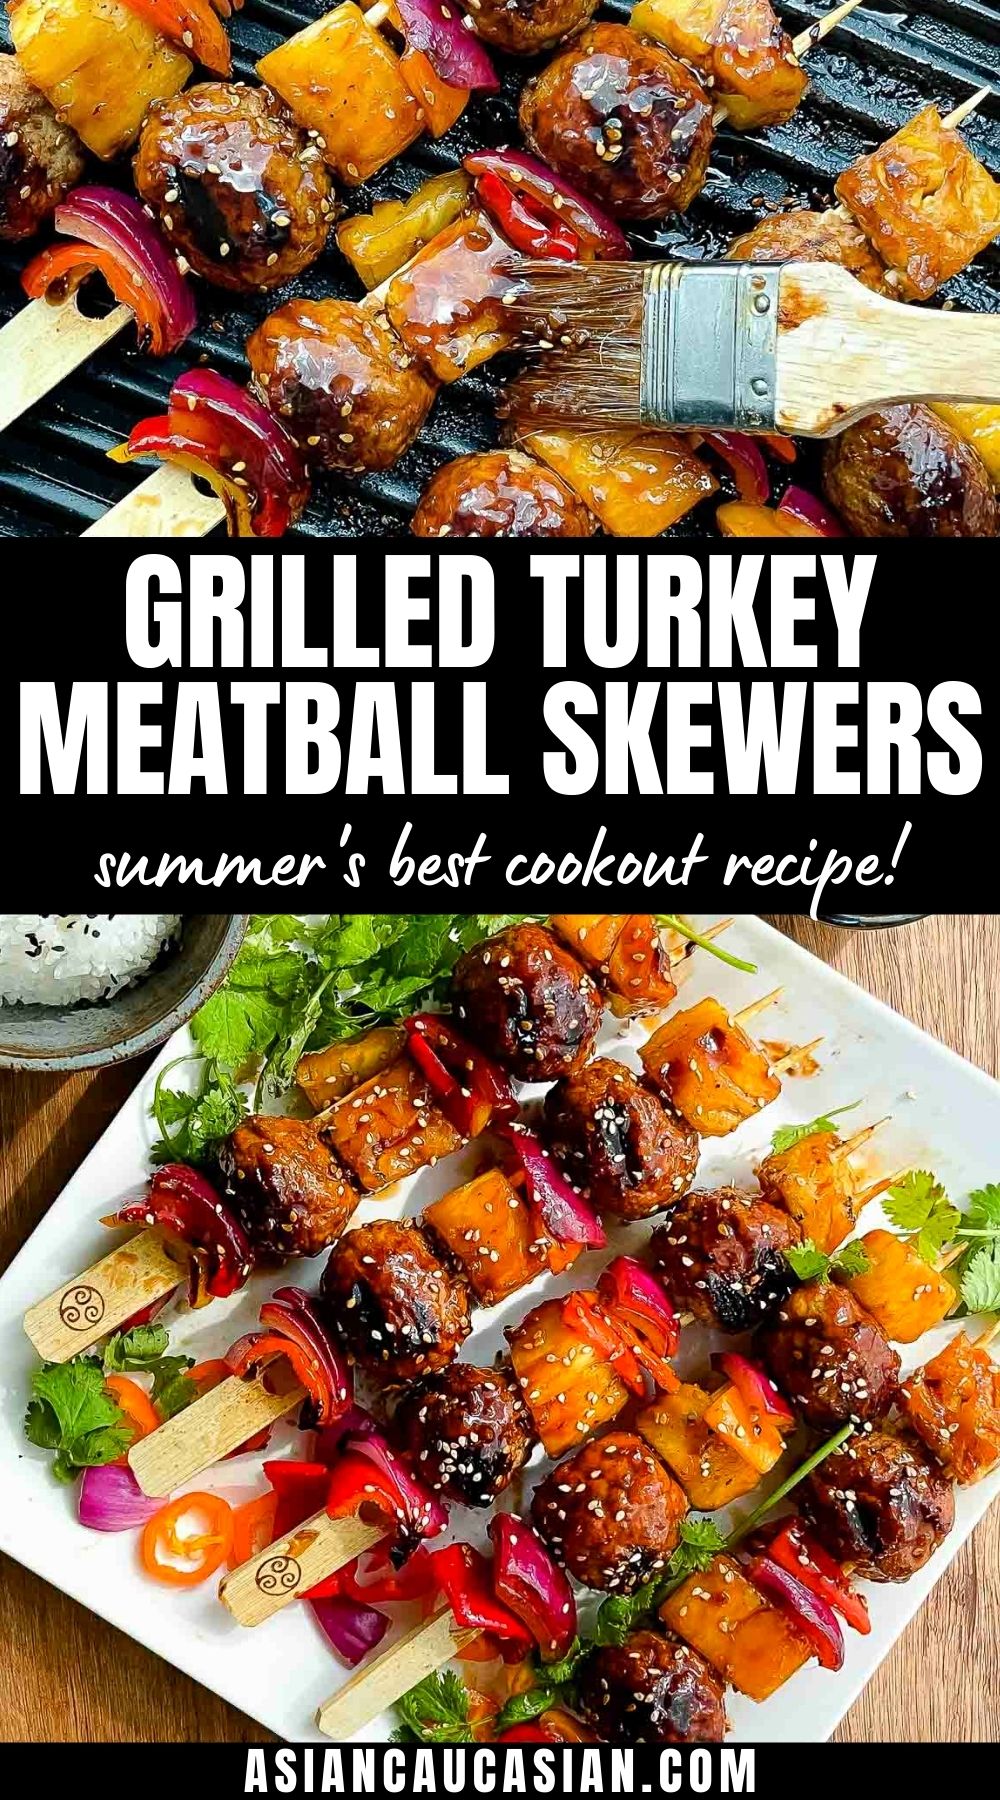 These juicy, Grilled Turkey Meatball Skewers are perfect for easy summer grilling! Made with all Trader Joe's ingredients, these meatball skewers or shish kabobs come together in just 20 minutes! How easy is that for your next backyard BBQ, cookout, or summer celebrations like July 4th and Labor Day weekend?